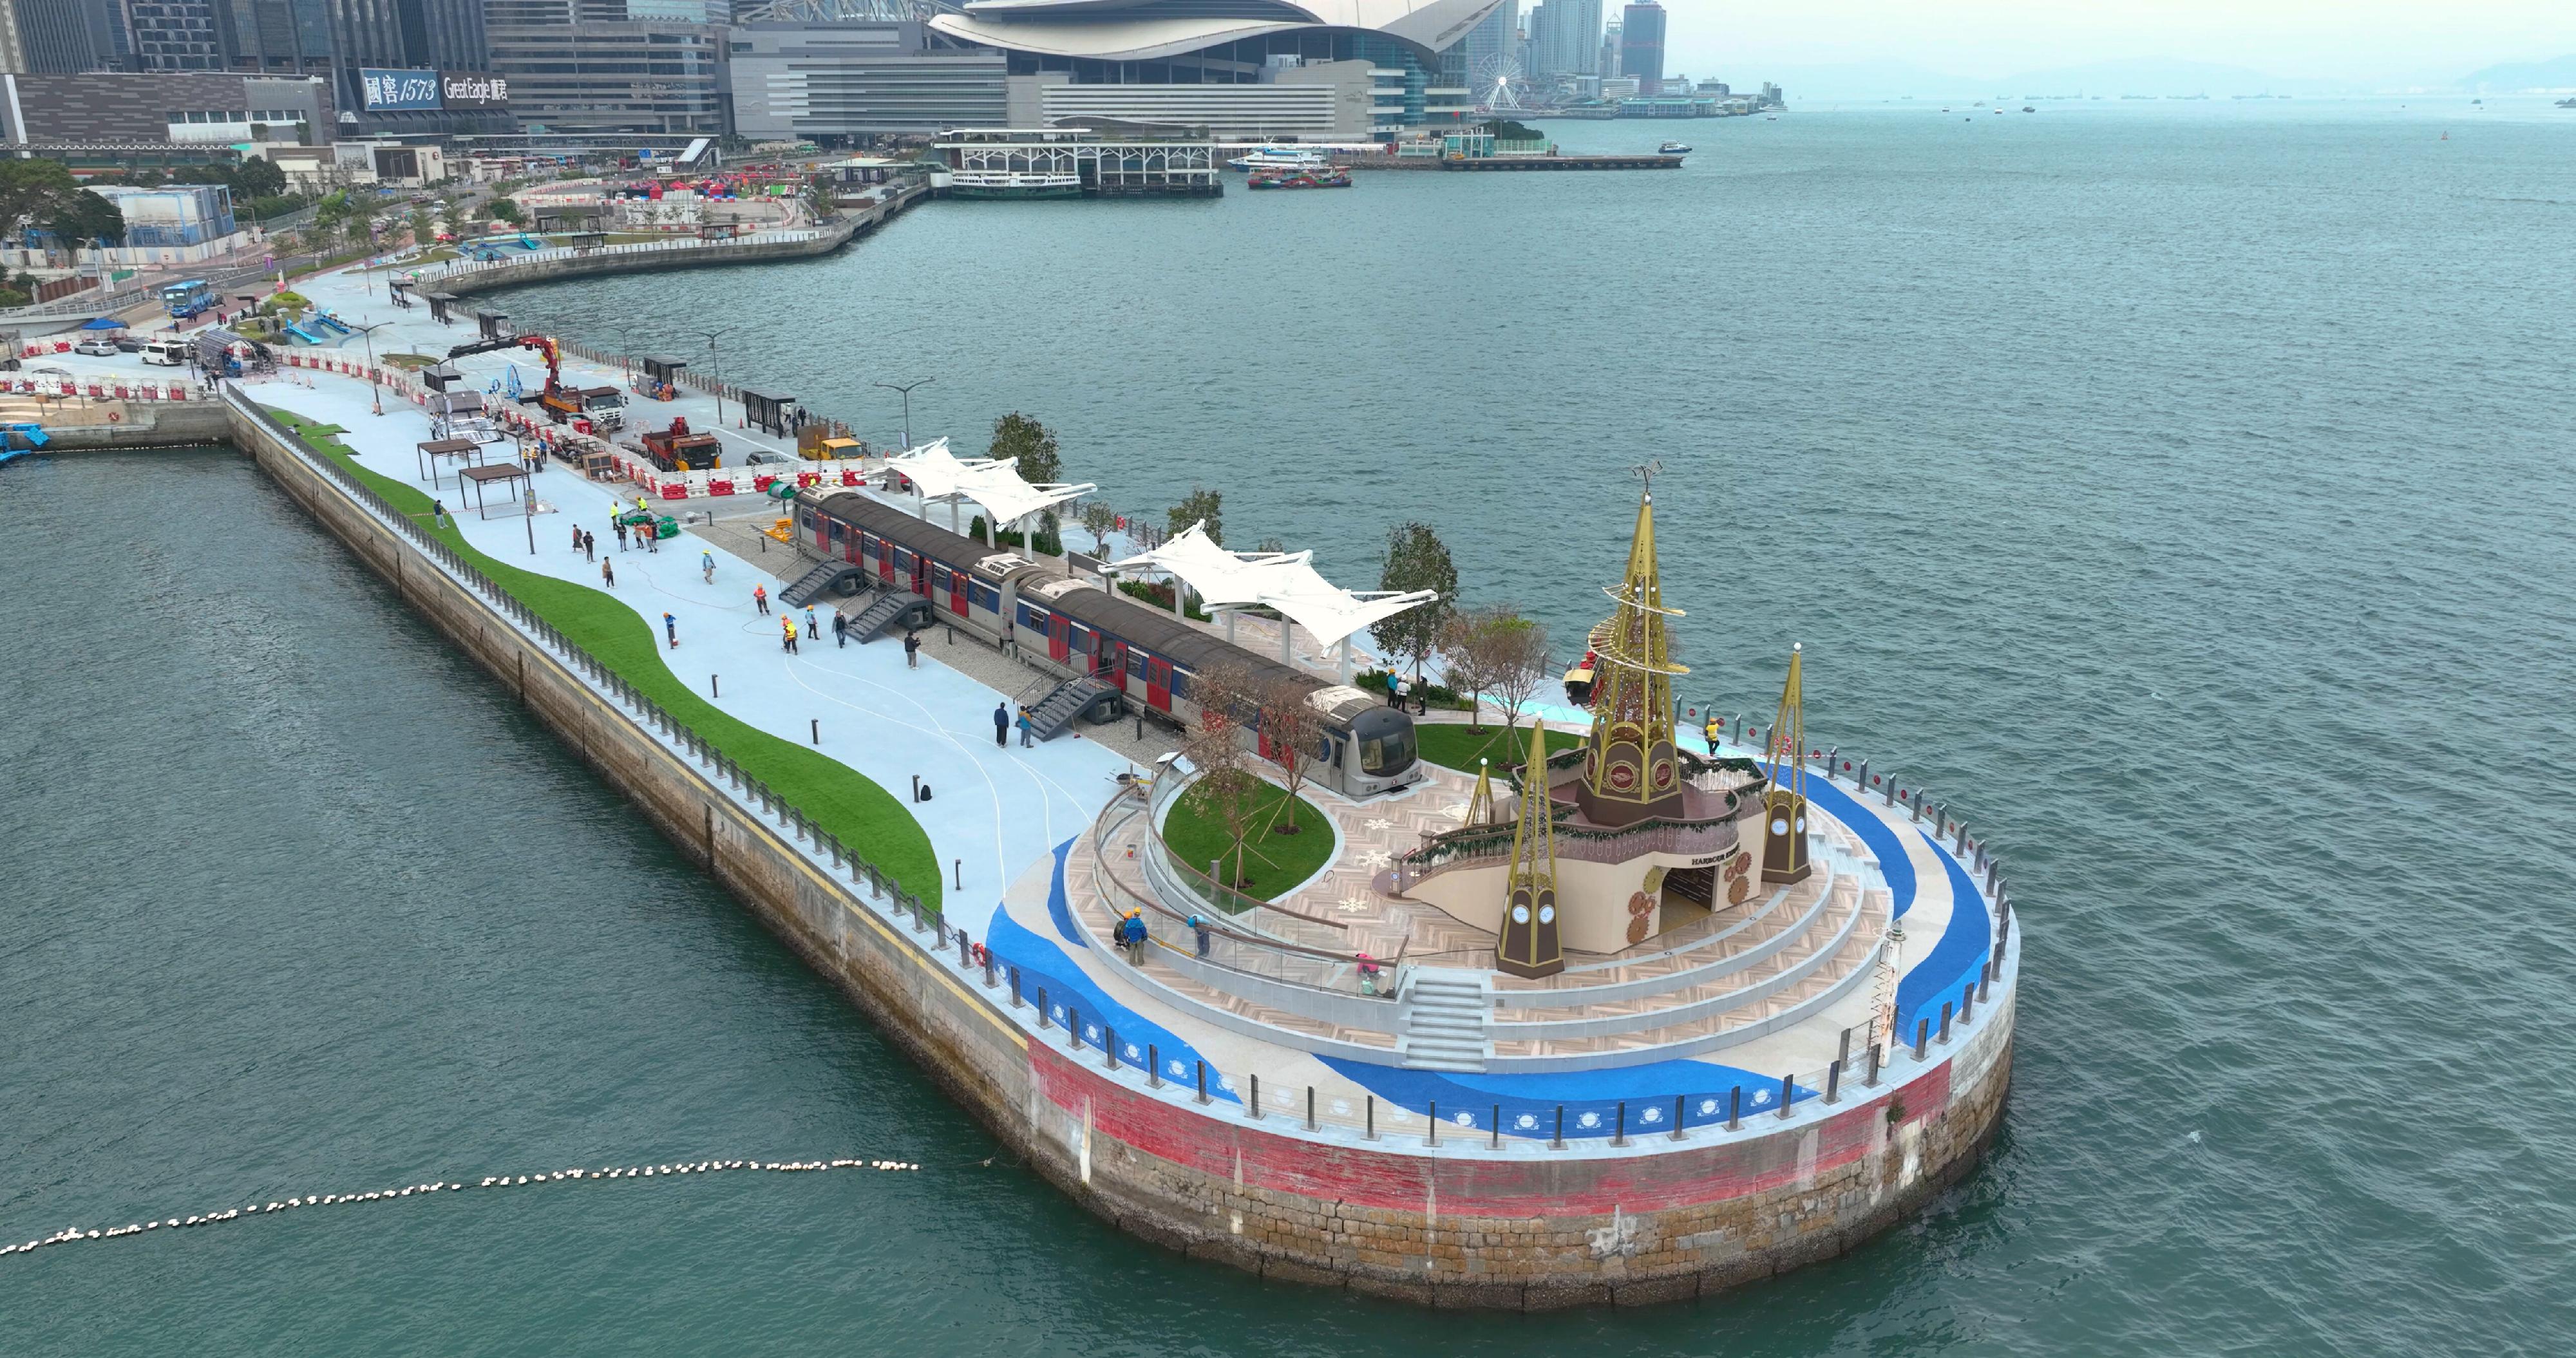 The Water Sports and Recreation Precinct (Phase 4) in Wan Chai will open tomorrow (December 21). A stepped train platform is available for visitors to enjoy the views of Victoria Harbour from different angles.